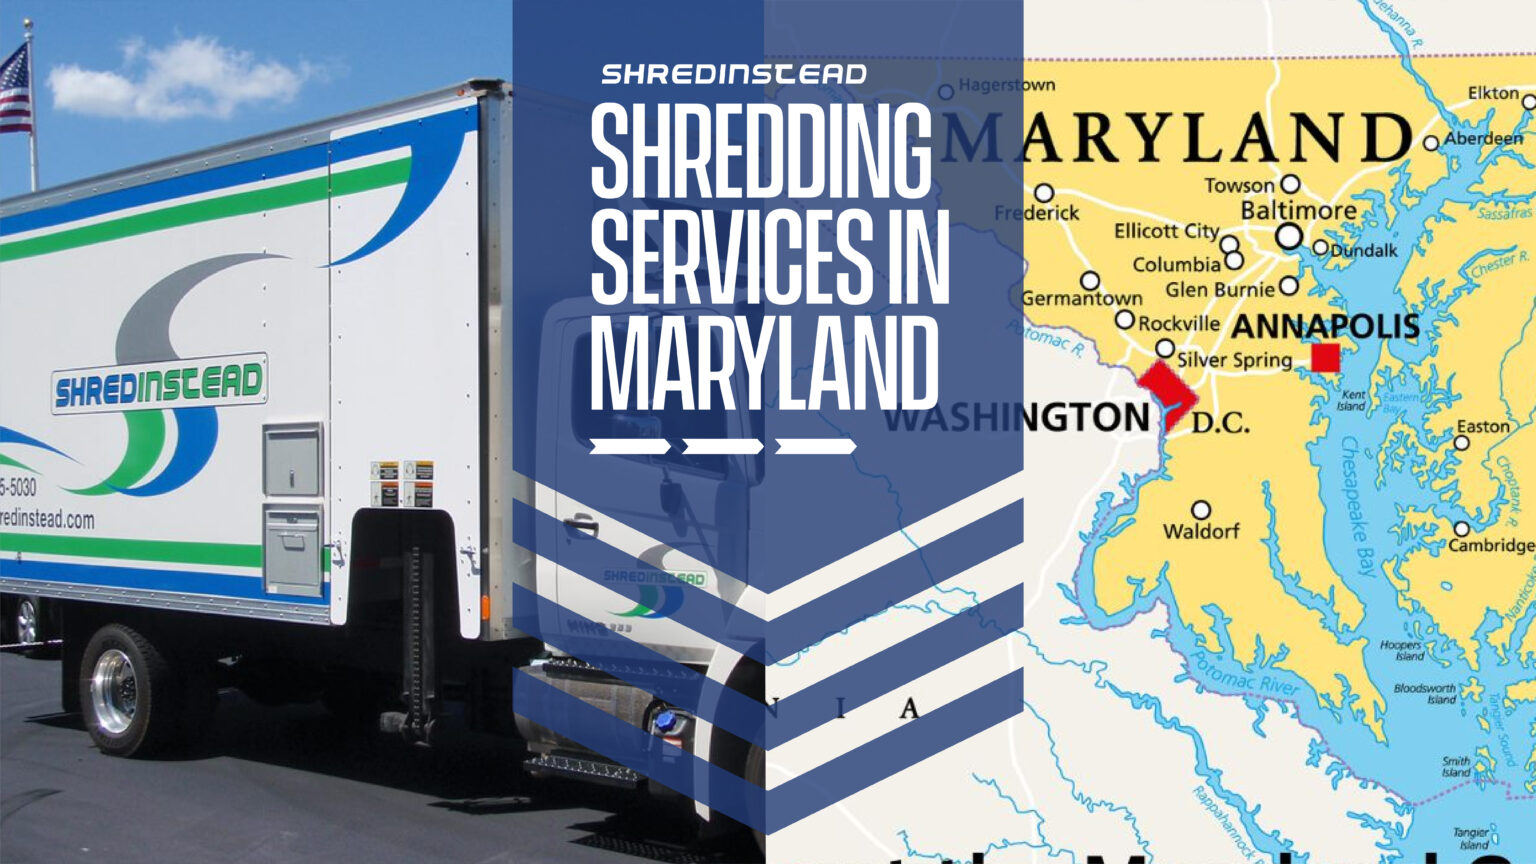 Shredding Services in Maryland